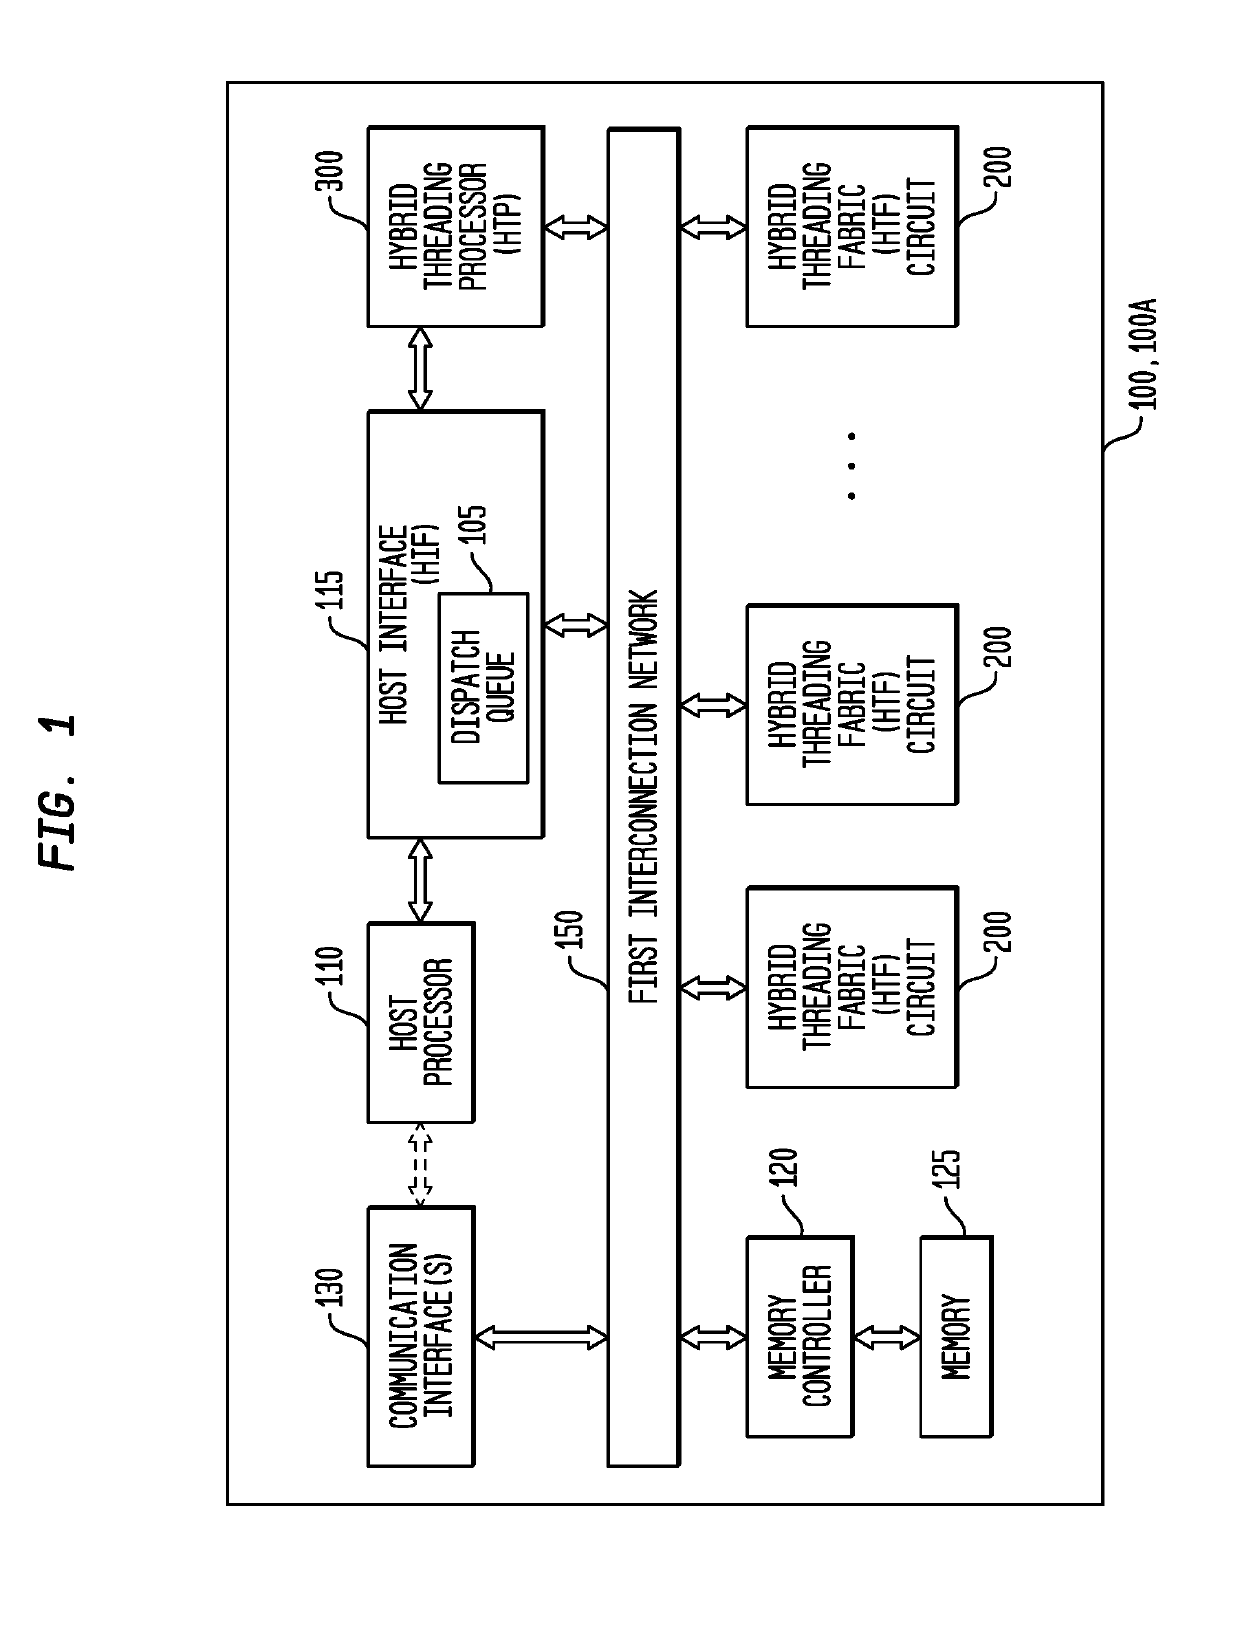 Multi-Threaded, Self-Scheduling Reconfigurable Computing Fabric